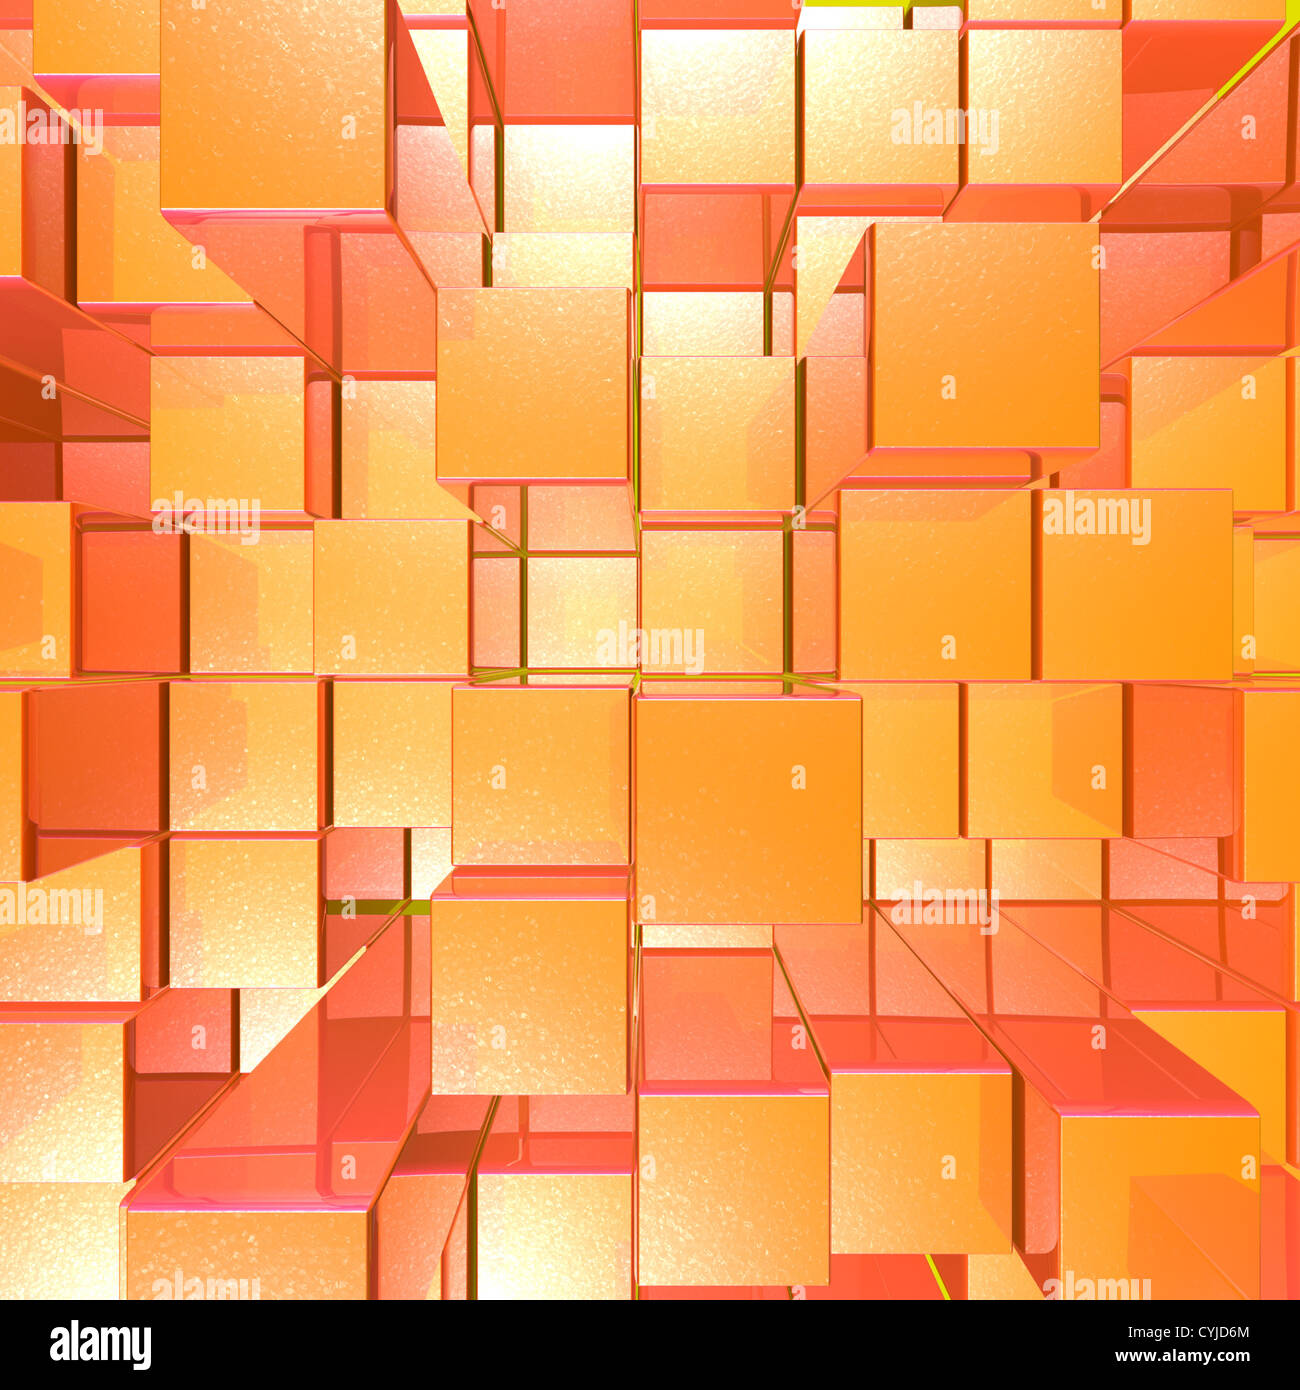 Bright Glowing Red And Orange Background With Cubes Or Squares Stock Photo